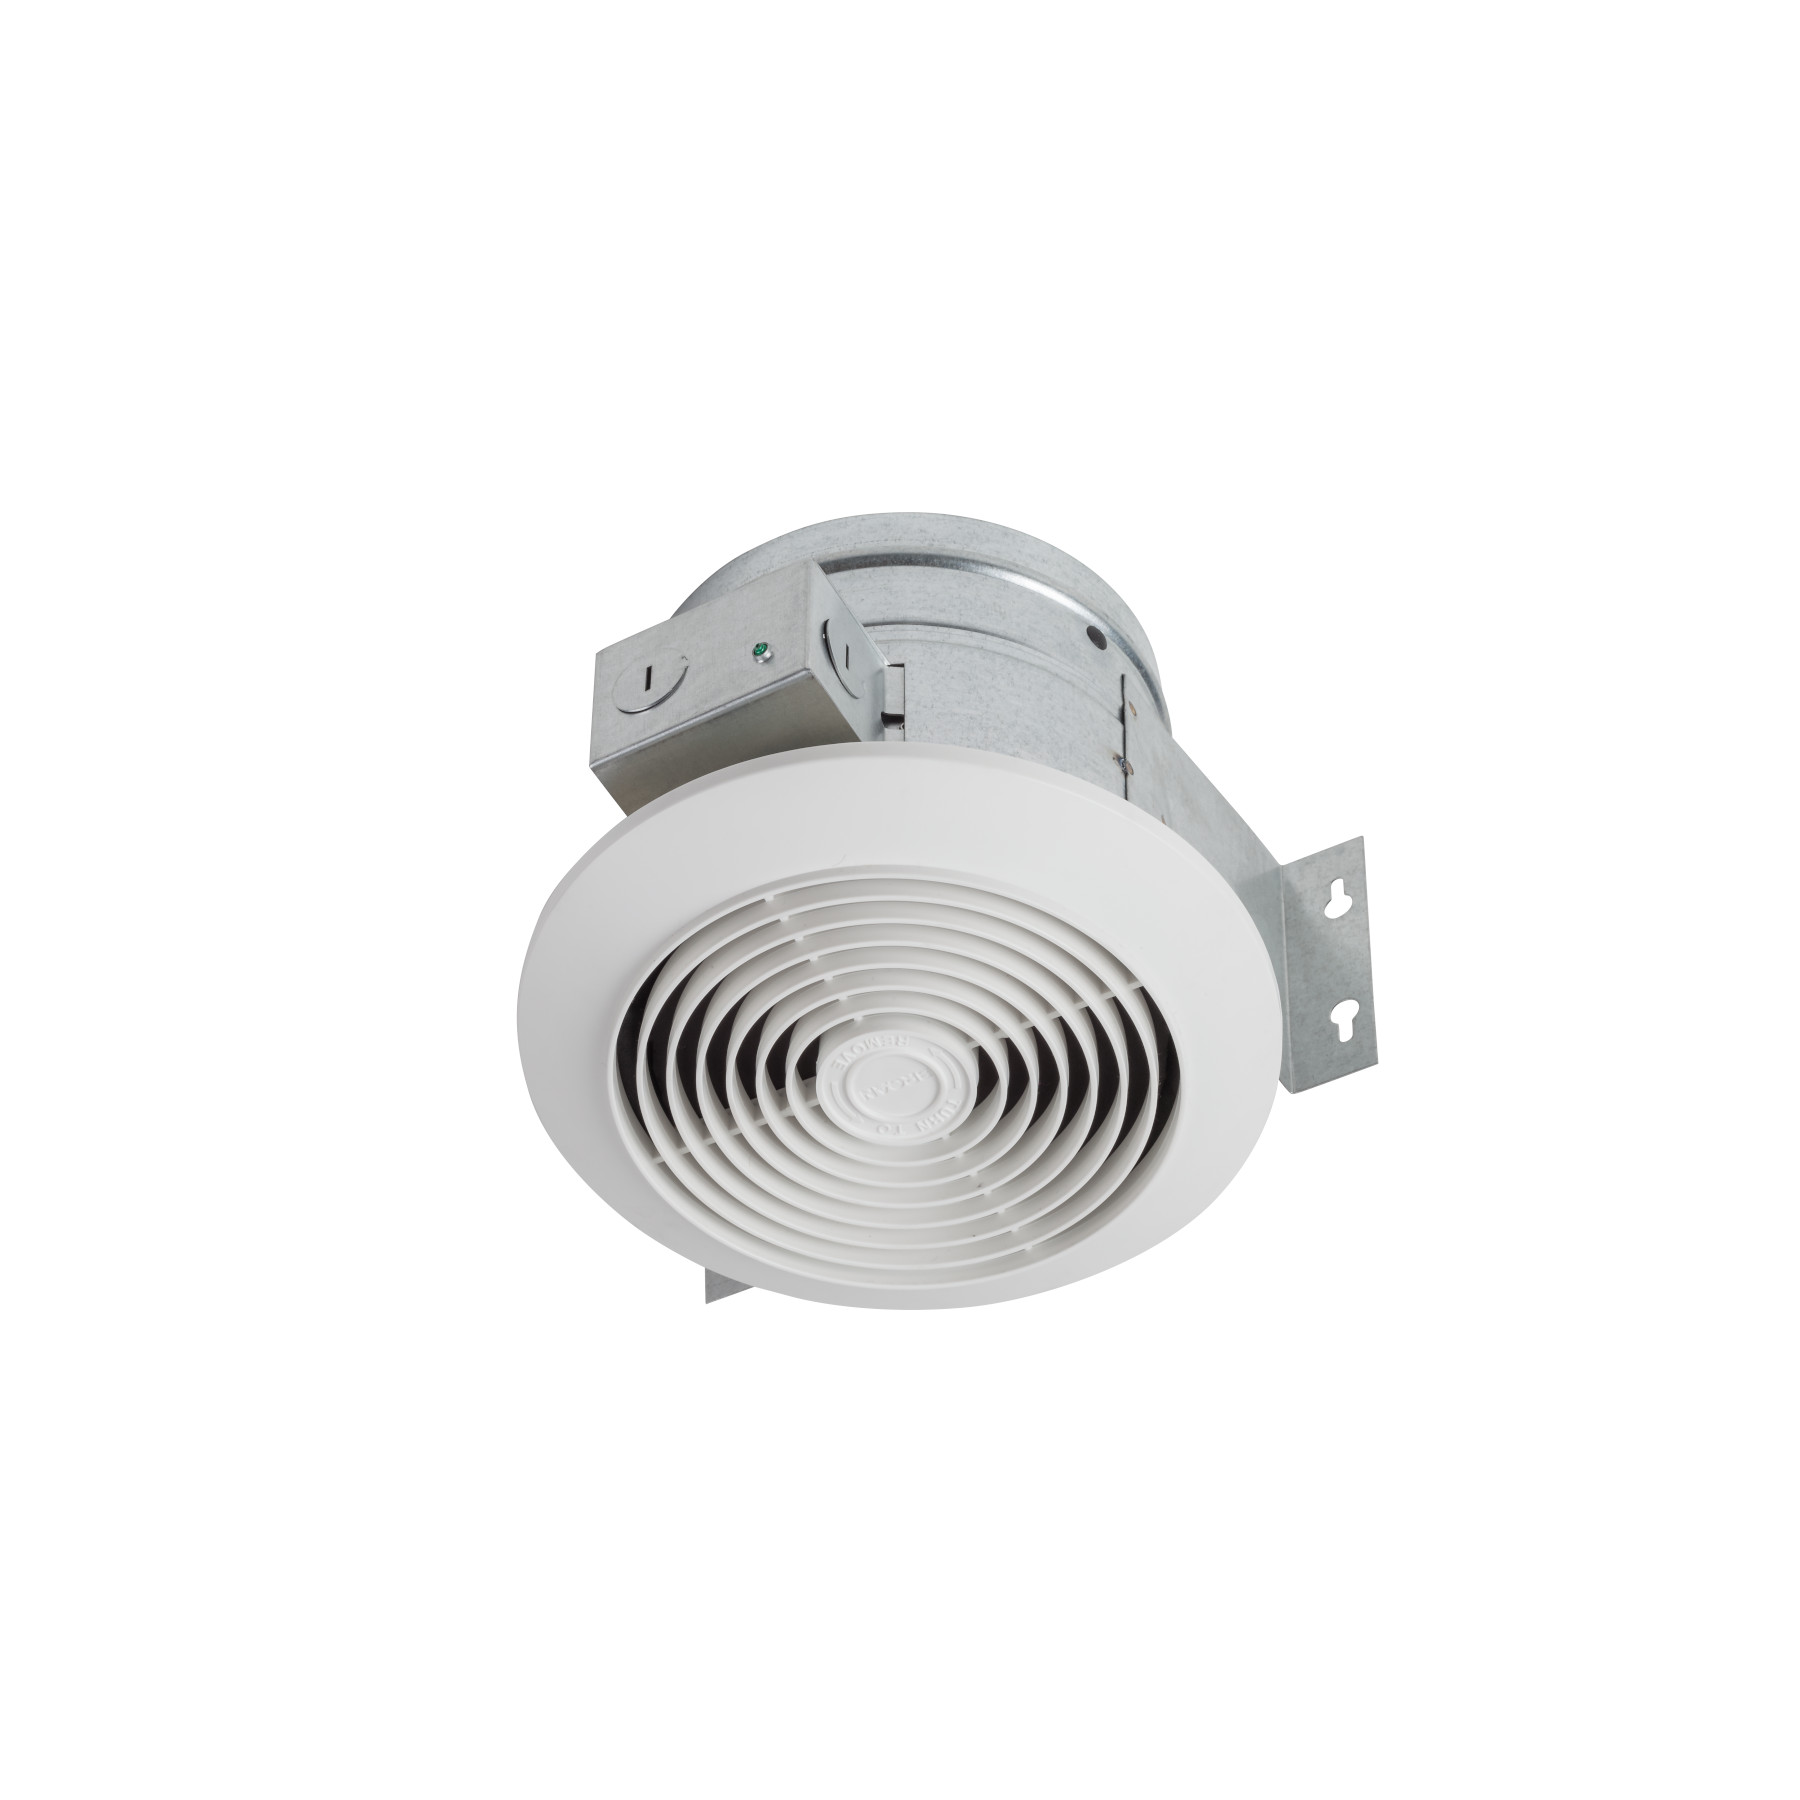 **DISCONTINUED** Broan® 6-Inch Vertical Discharge Fan, 60 CFM